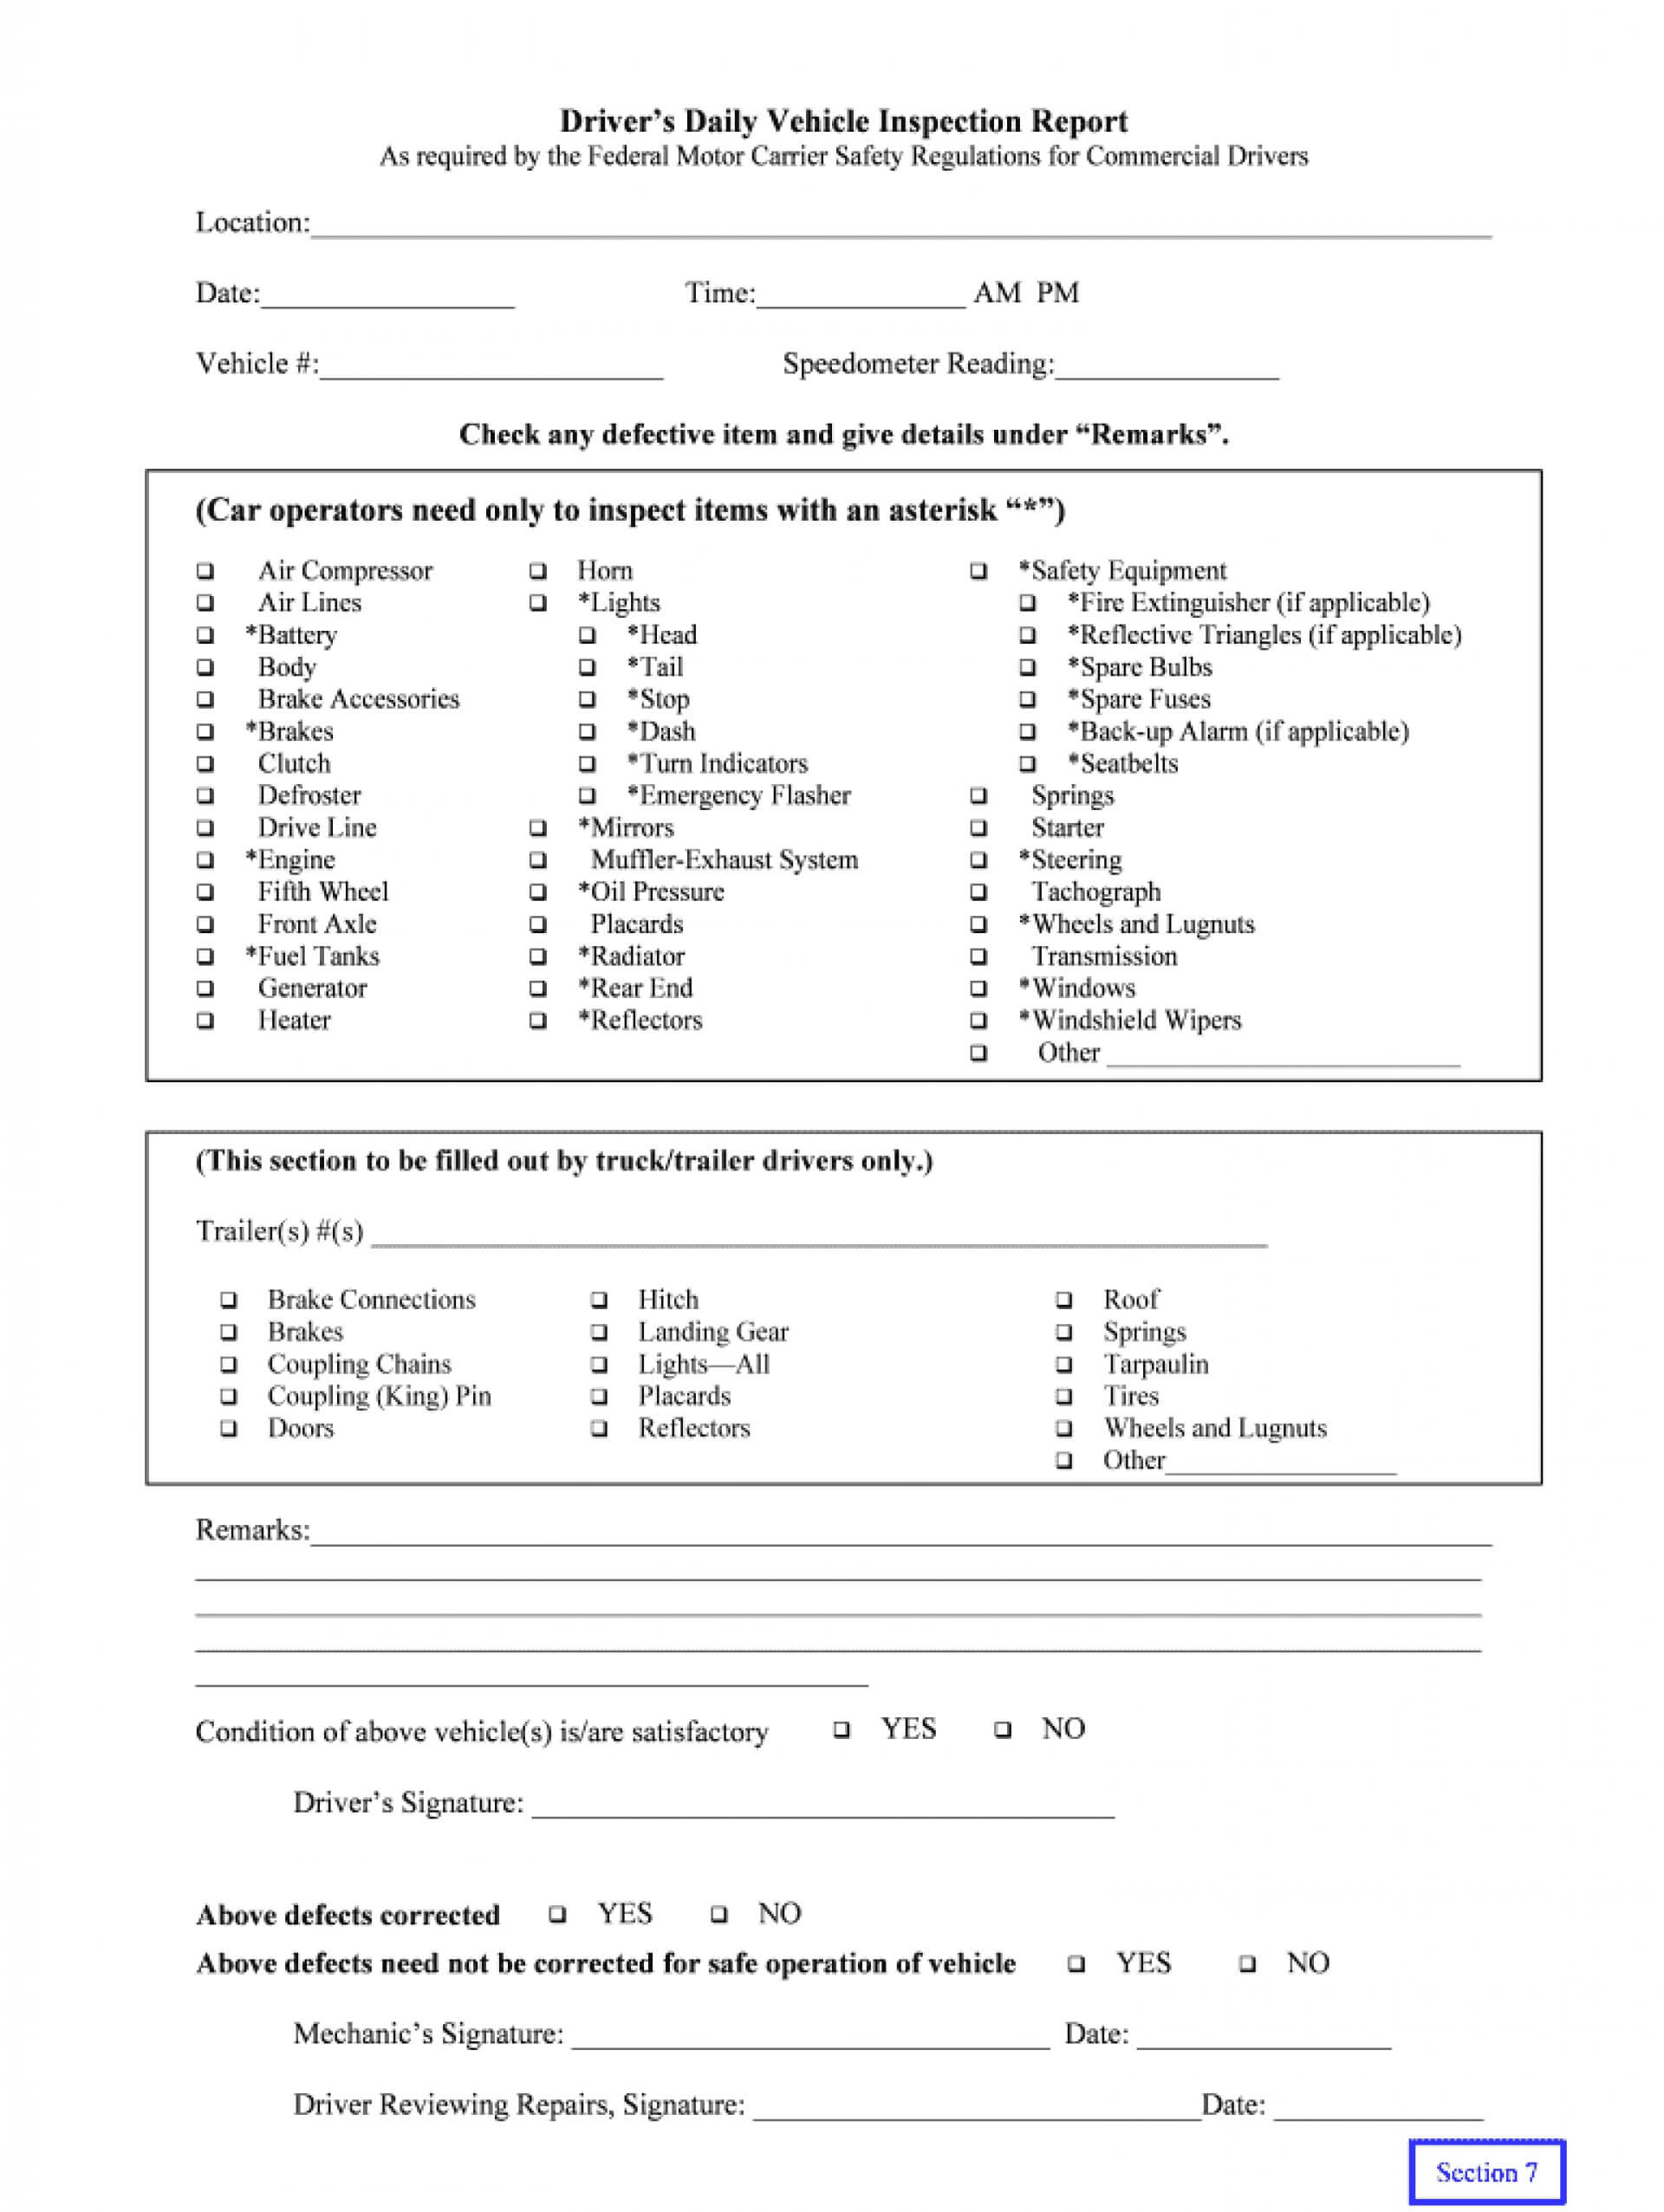 Archaicawful Daily Vehicle Inspection Report Template Ideas Regarding Vehicle Inspection Report Template